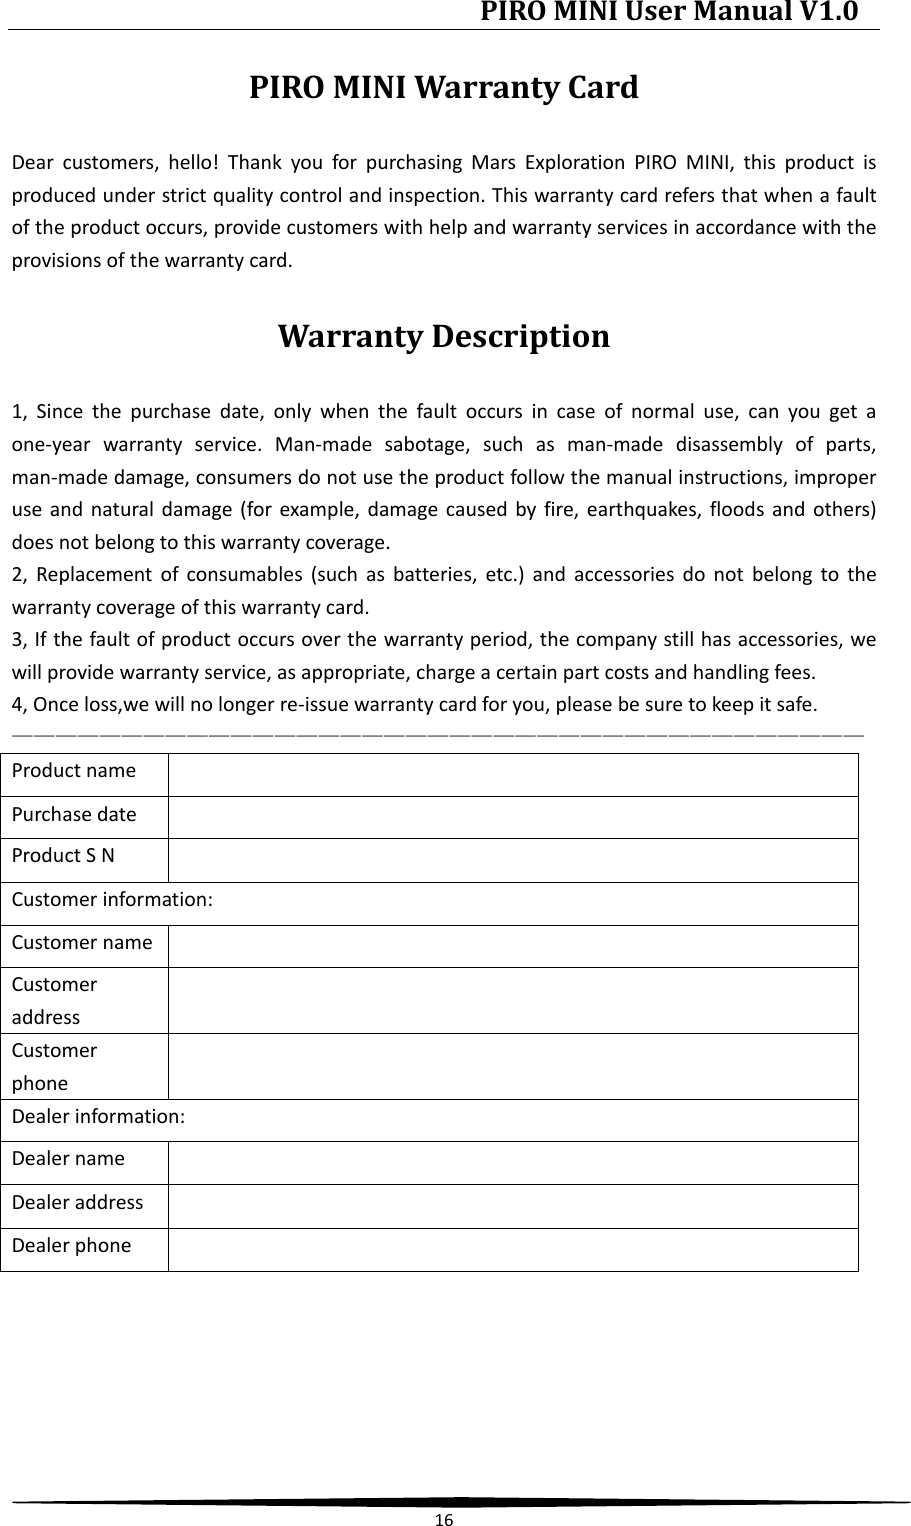 PIRO MINI User Manual V1.0  16  PIRO MINI Warranty Card Dear customers, hello! Thank you for purchasing Mars Exploration PIRO MINI, this product is produced under strict quality control and inspection. This warranty card refers that when a fault of the product occurs, provide customers with help and warranty services in accordance with the provisions of the warranty card. Warranty Description 1, Since the purchase date, only when the fault occurs in case of normal use, can you get a one-year warranty service. Man-made sabotage, such as man-made disassembly of parts, man-made damage, consumers do not use the product follow the manual instructions, improper use and natural damage (for example, damage caused by fire, earthquakes, floods and others) does not belong to this warranty coverage. 2, Replacement of consumables (such as batteries, etc.) and accessories do not belong to the warranty coverage of this warranty card. 3, If the fault of product occurs over the warranty period, the company still has accessories, we will provide warranty service, as appropriate, charge a certain part costs and handling fees. 4, Once loss,we will no longer re-issue warranty card for you, please be sure to keep it safe. ——————————————————————————————————————— Product name   Purchase date   Product S N   Customer information: Customer name   Customer address  Customer phone  Dealer information: Dealer name   Dealer address   Dealer phone    